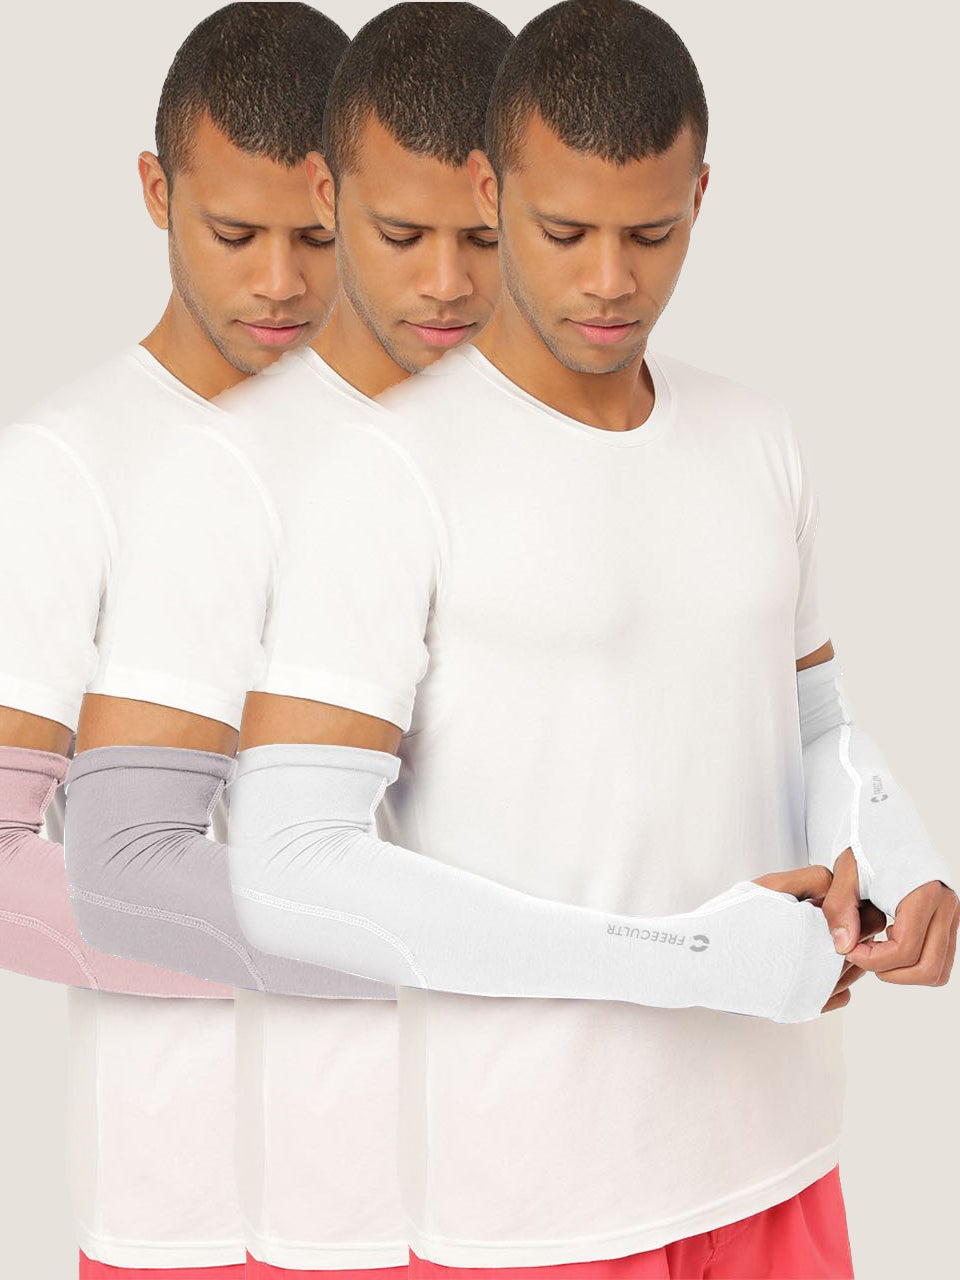 Golden Arm Sleeves (Pack of 3)